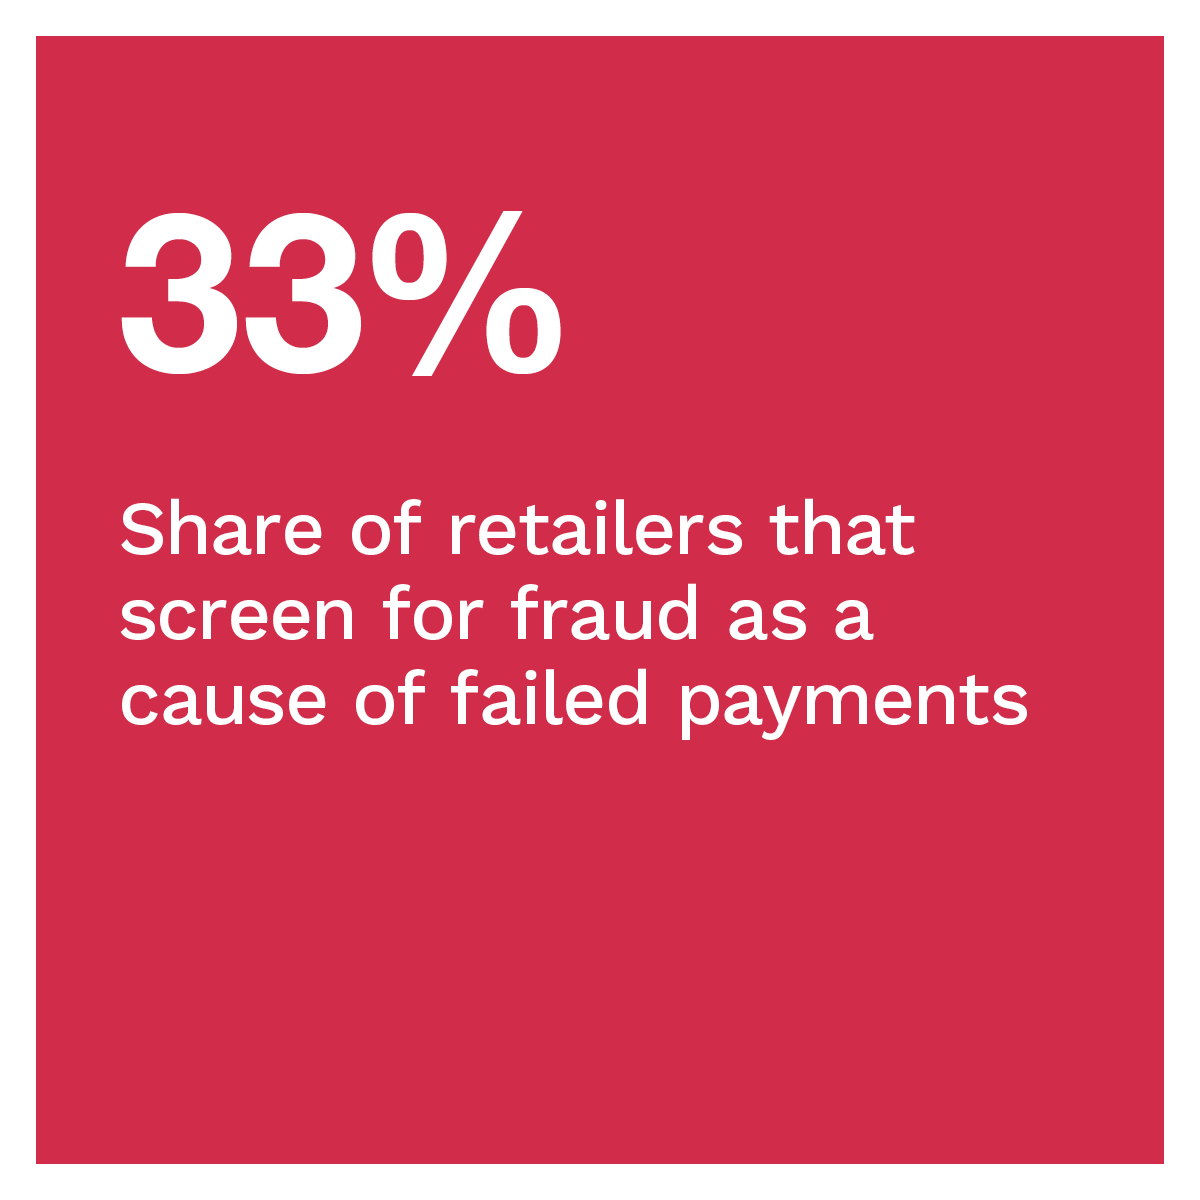 33%: Share of retailers that screen for fraud as a cause of failed payments